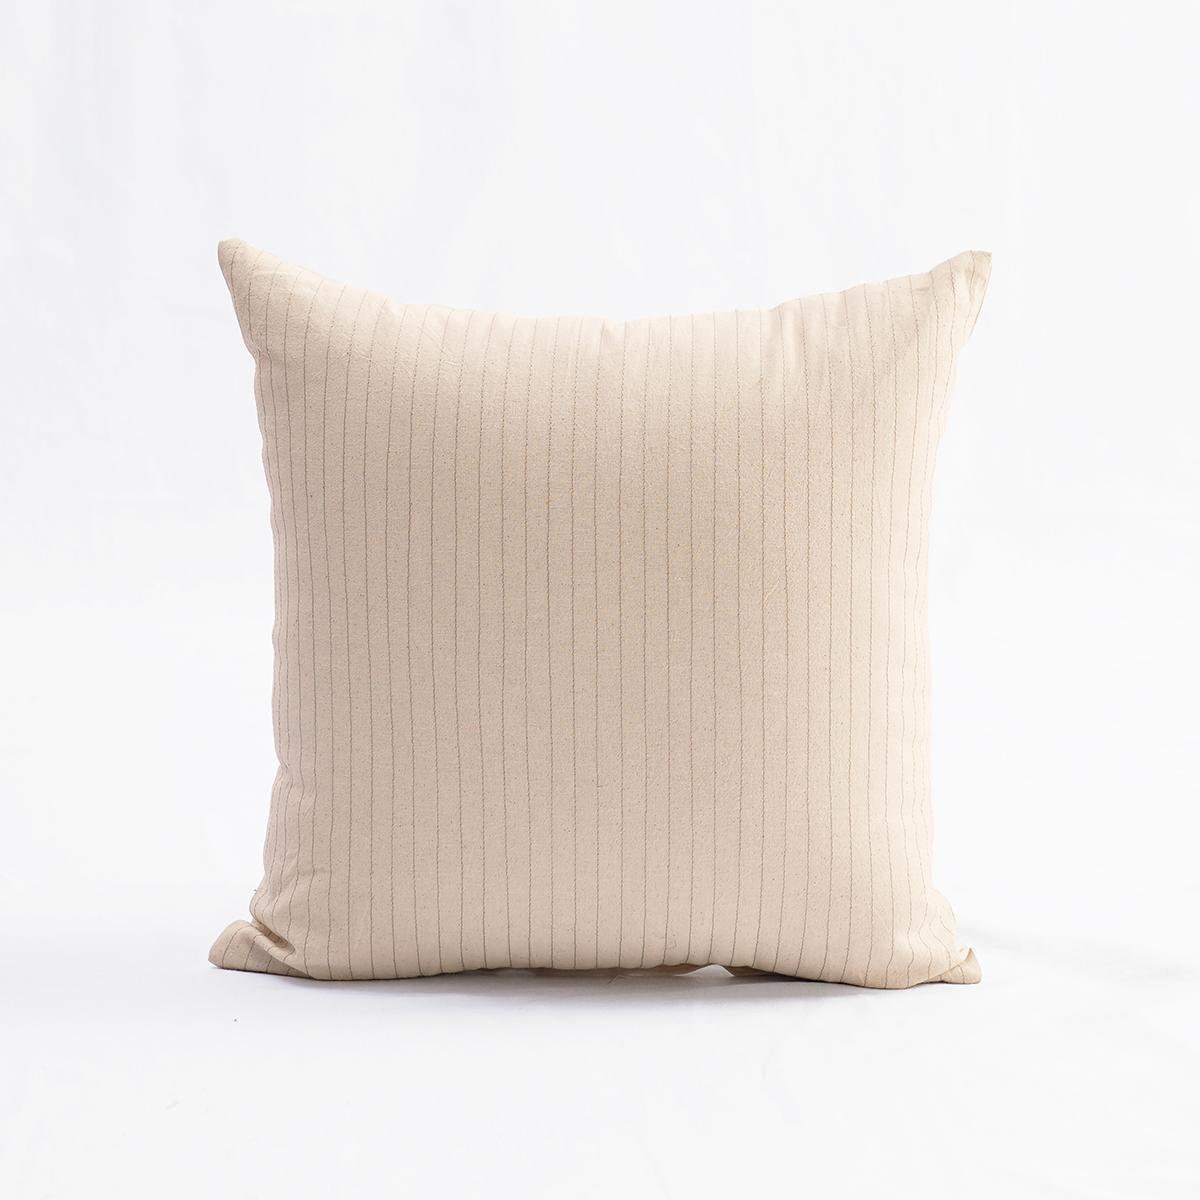 Natural colour striped cotton Pillow cover, sizes available